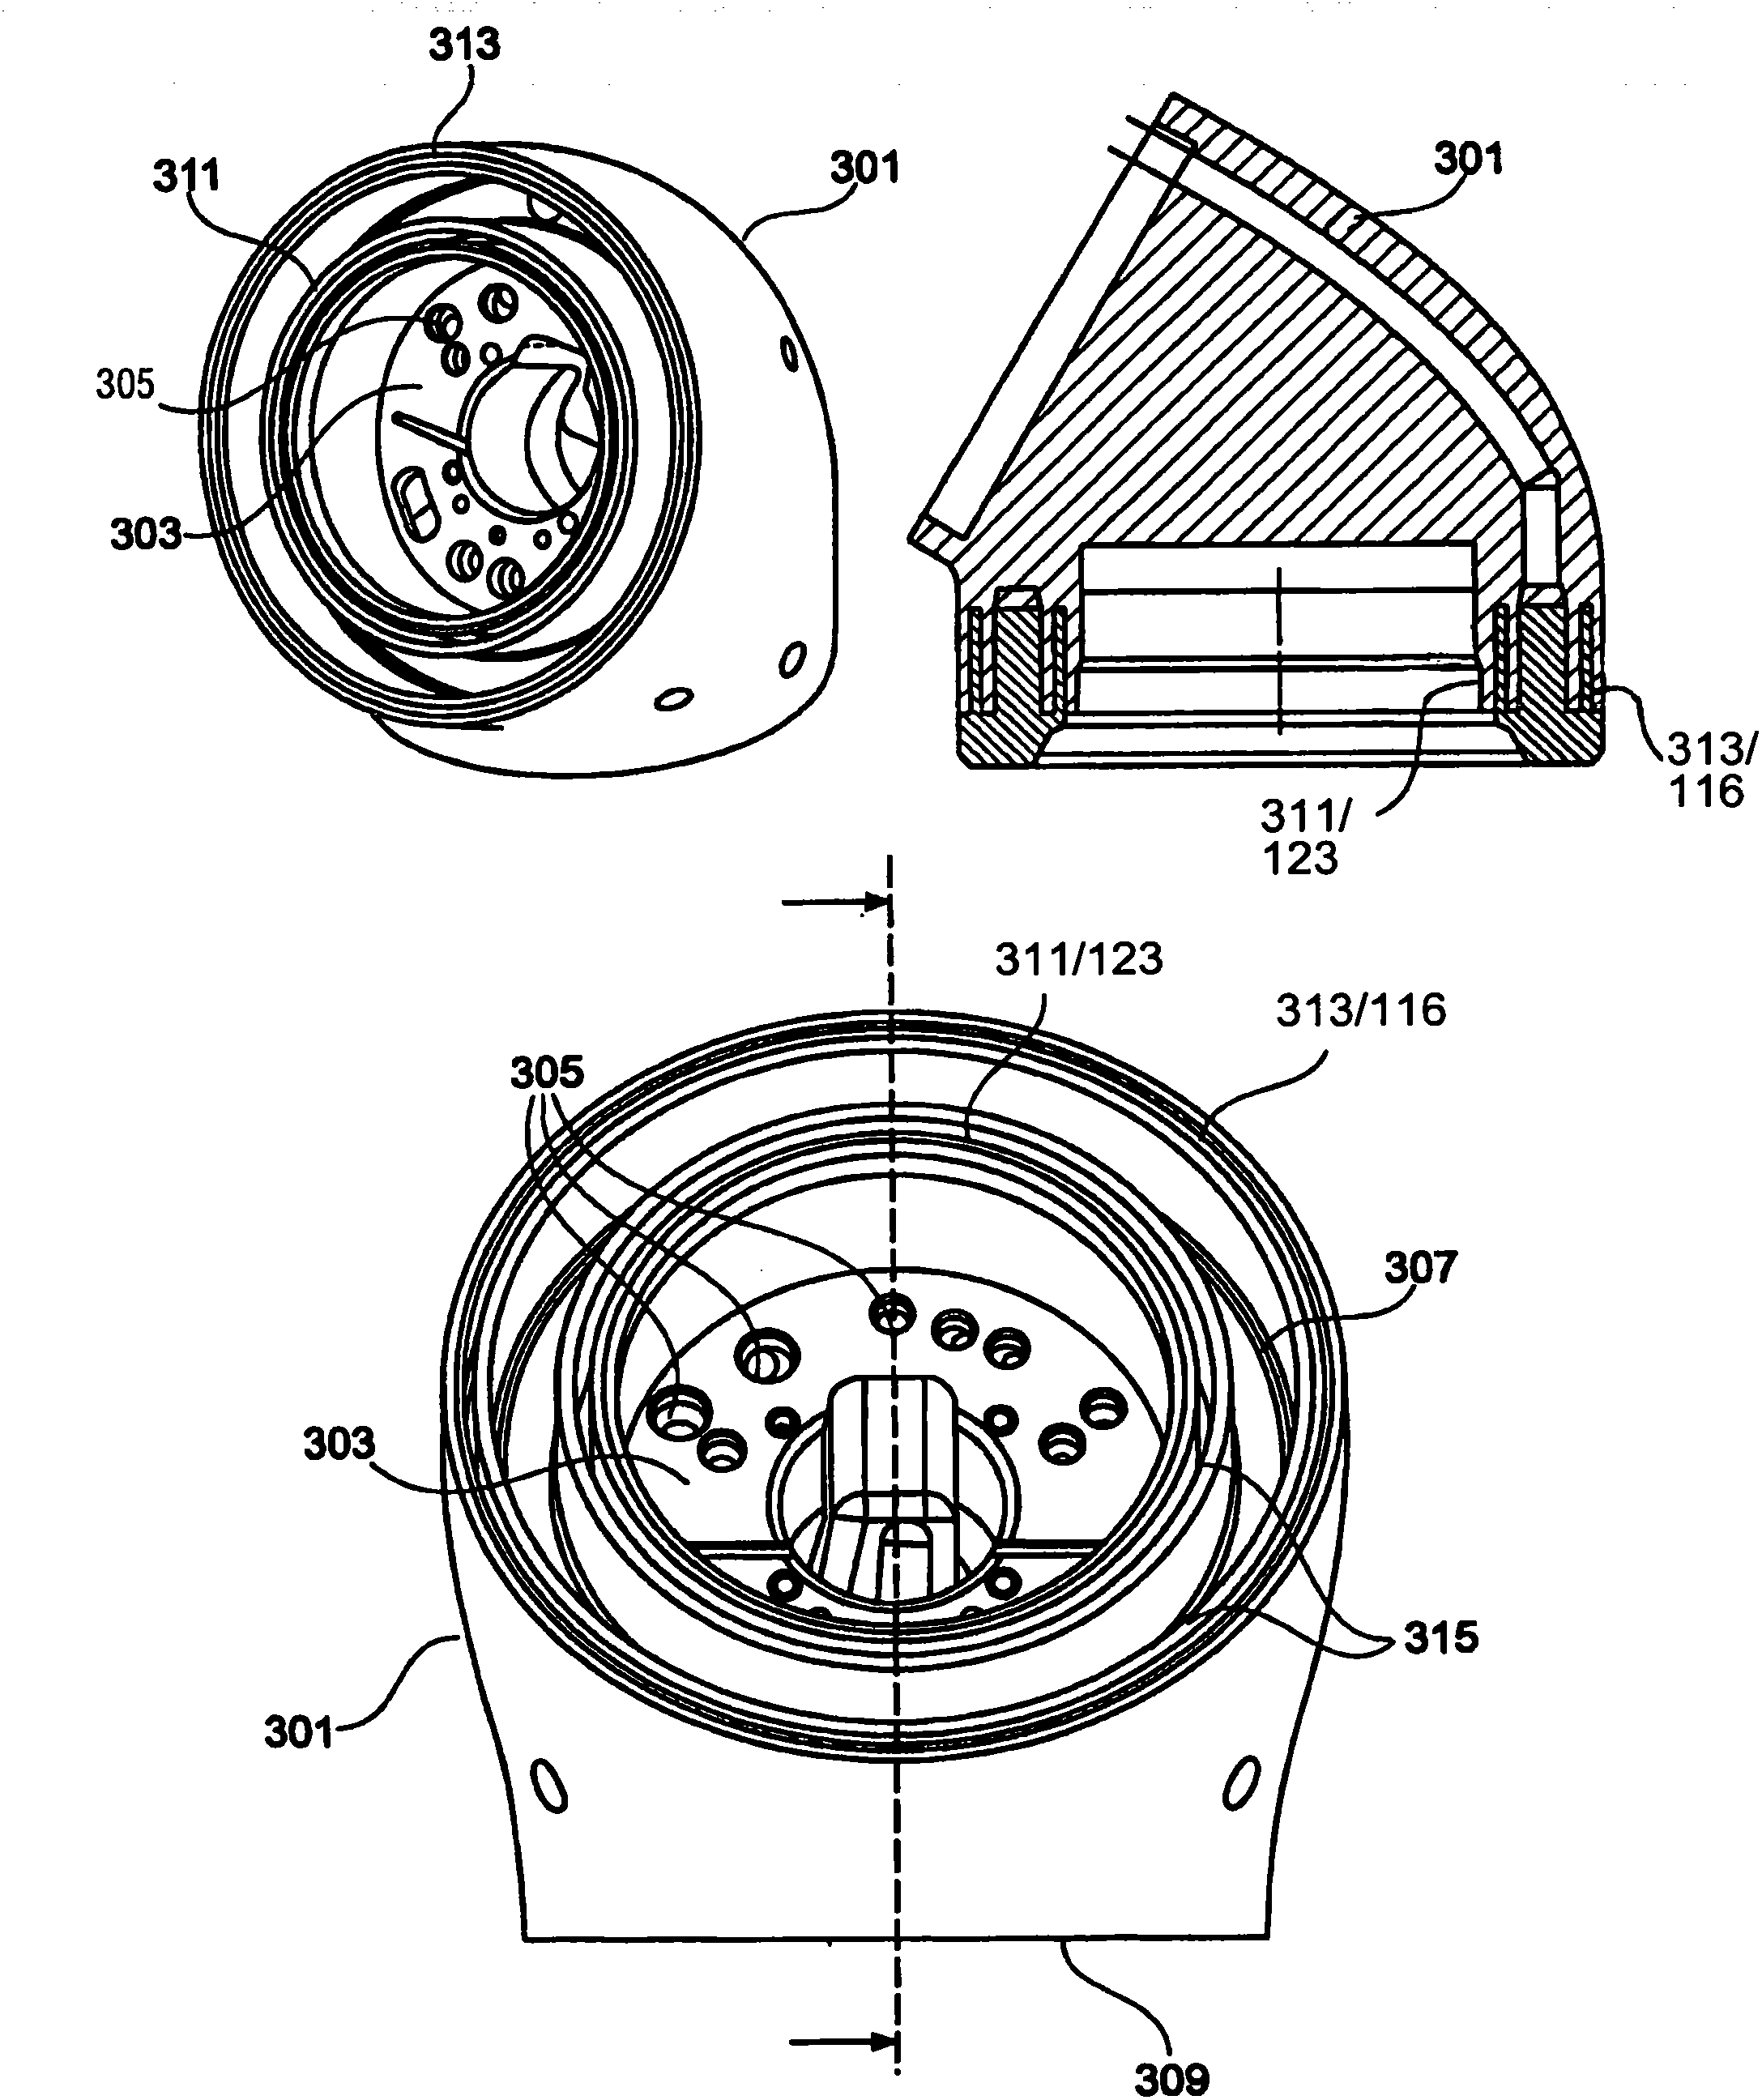 Electrode Assembly For An Electrostatic Atomizer